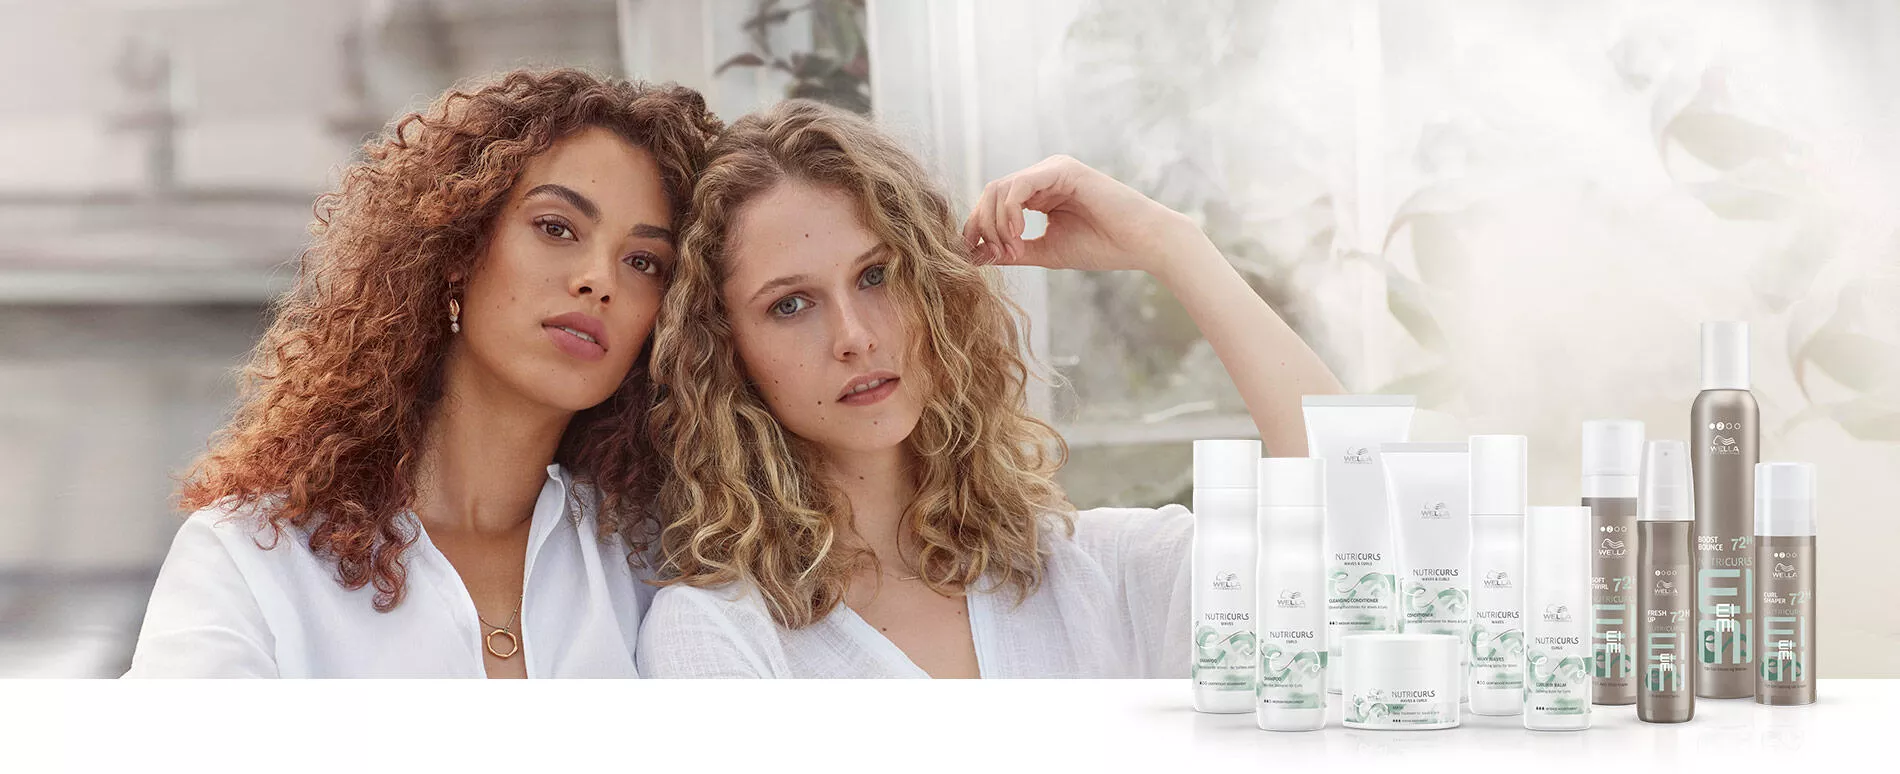 Two women with shoulder-length corkscrew curls in white clothes, sitting together, plus NUTRICURLS product bottlesv